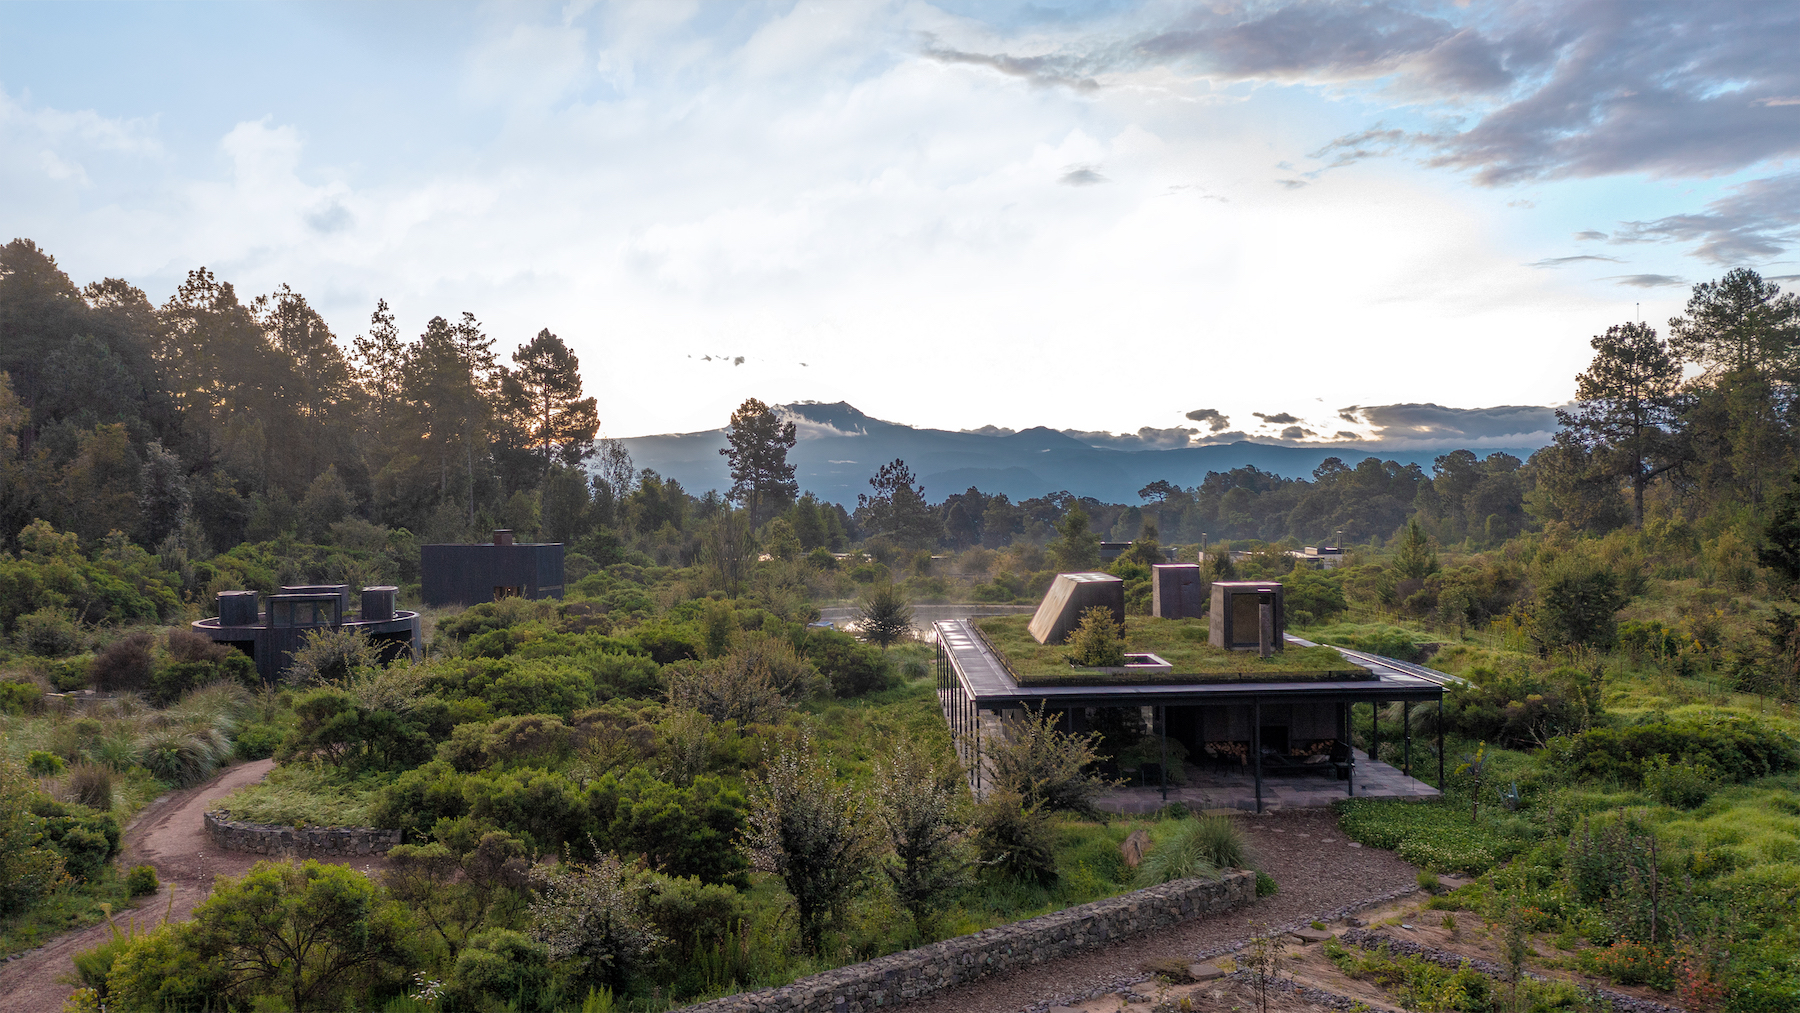  Rain Harvest Home is a water-autonomous home in Temascaltepec, Mexico that disperses living functions into three porous, green-roofed buildings that each collect rainwater.